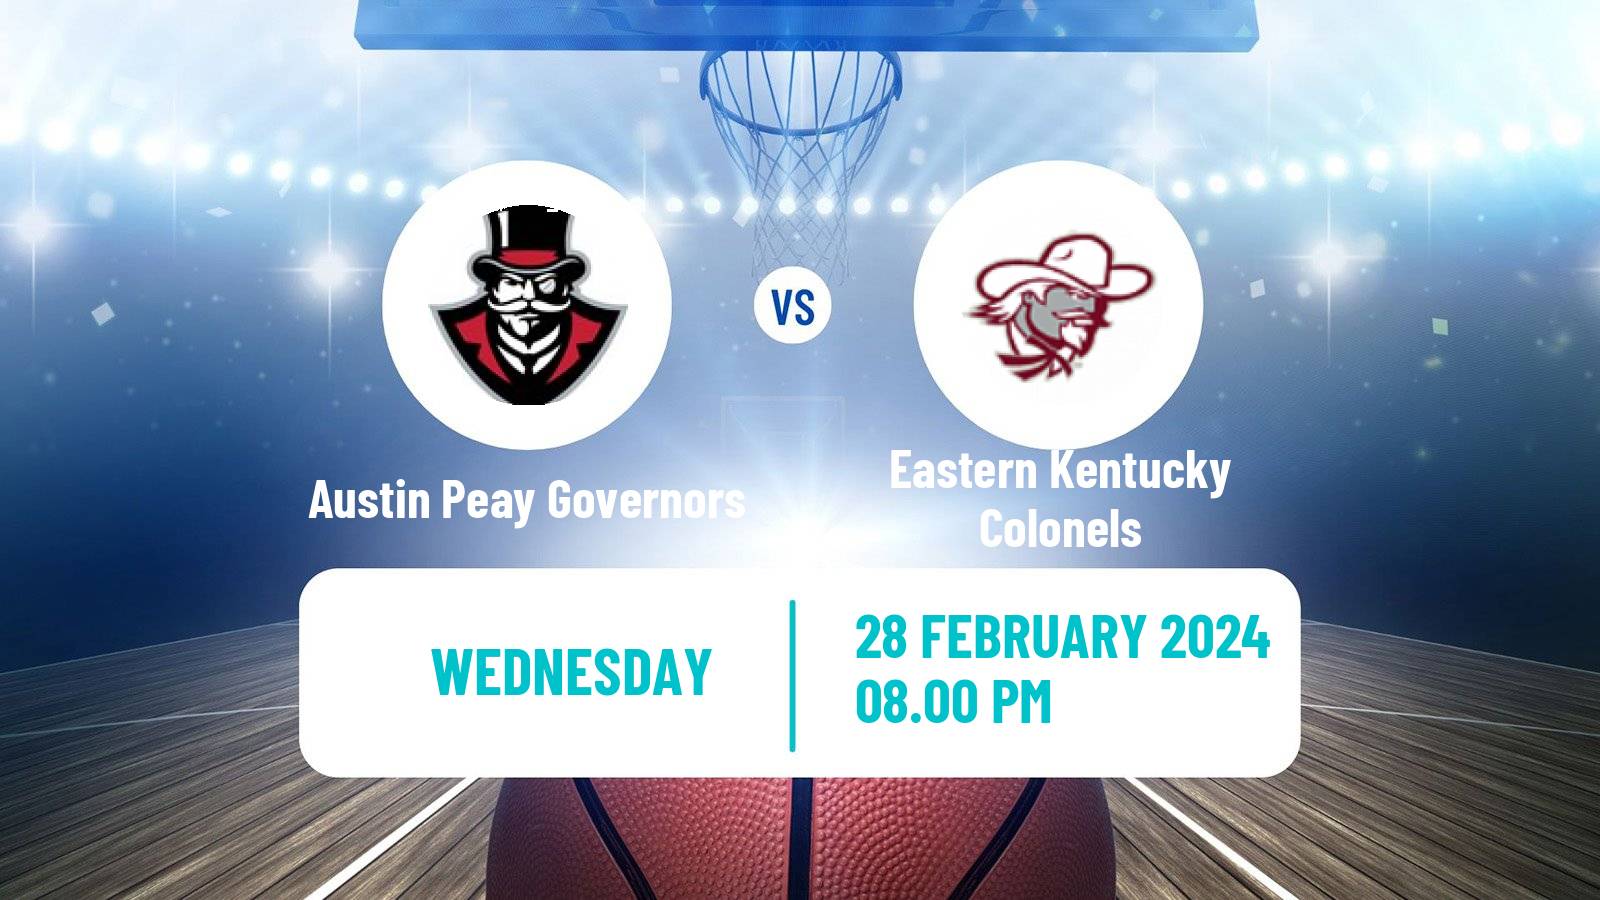 Basketball NCAA College Basketball Austin Peay Governors - Eastern Kentucky Colonels